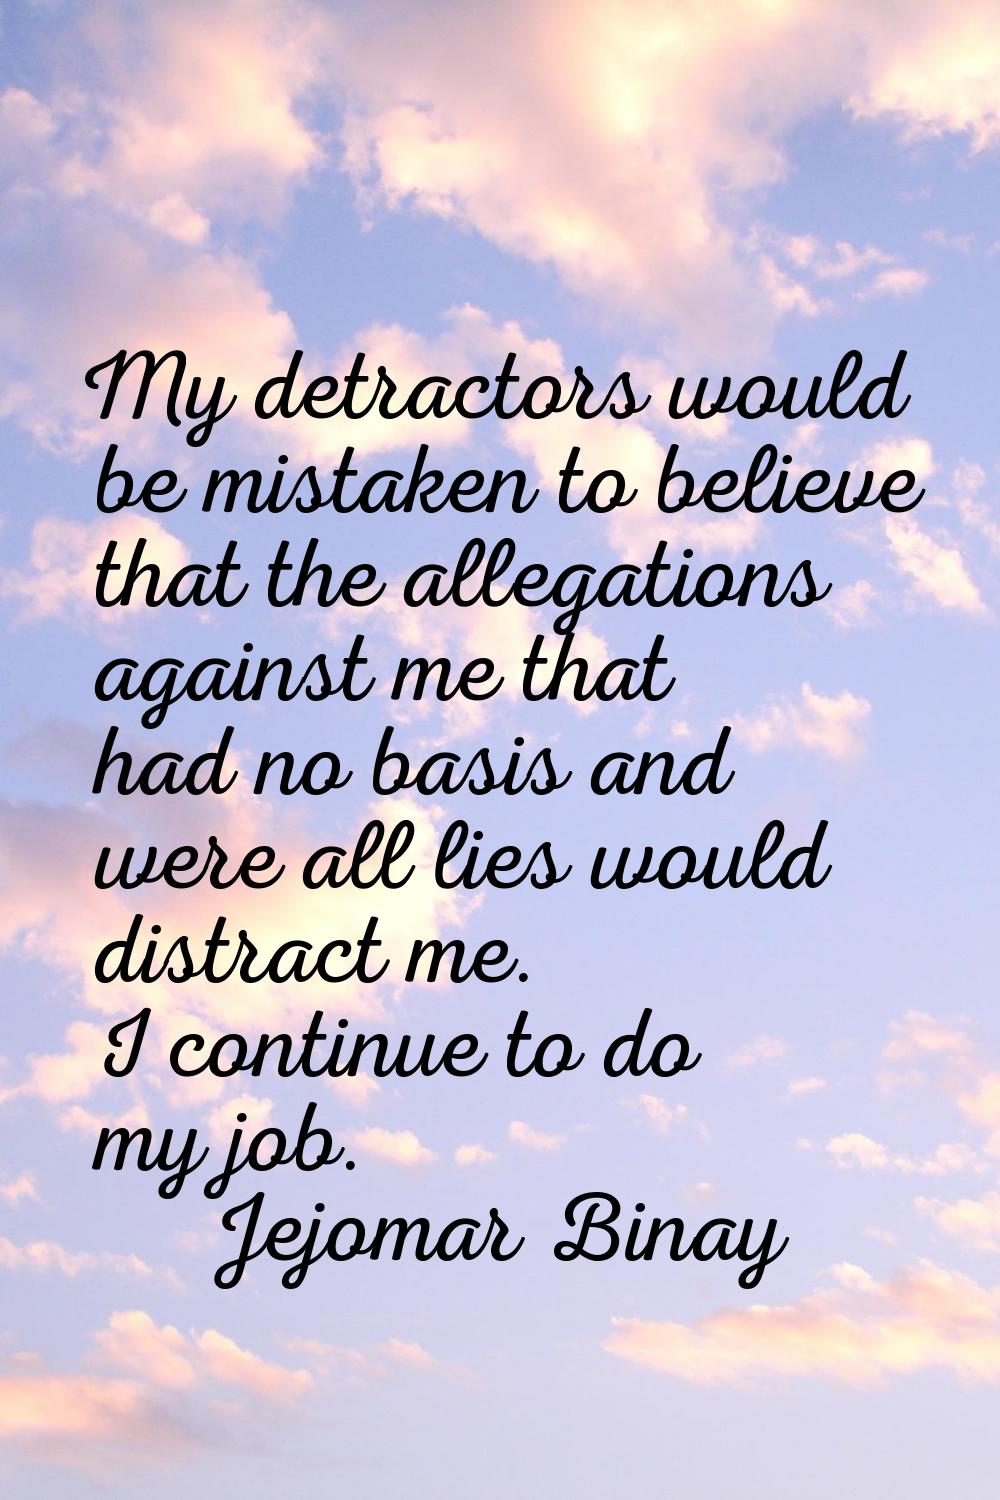 My detractors would be mistaken to believe that the allegations against me that had no basis and we